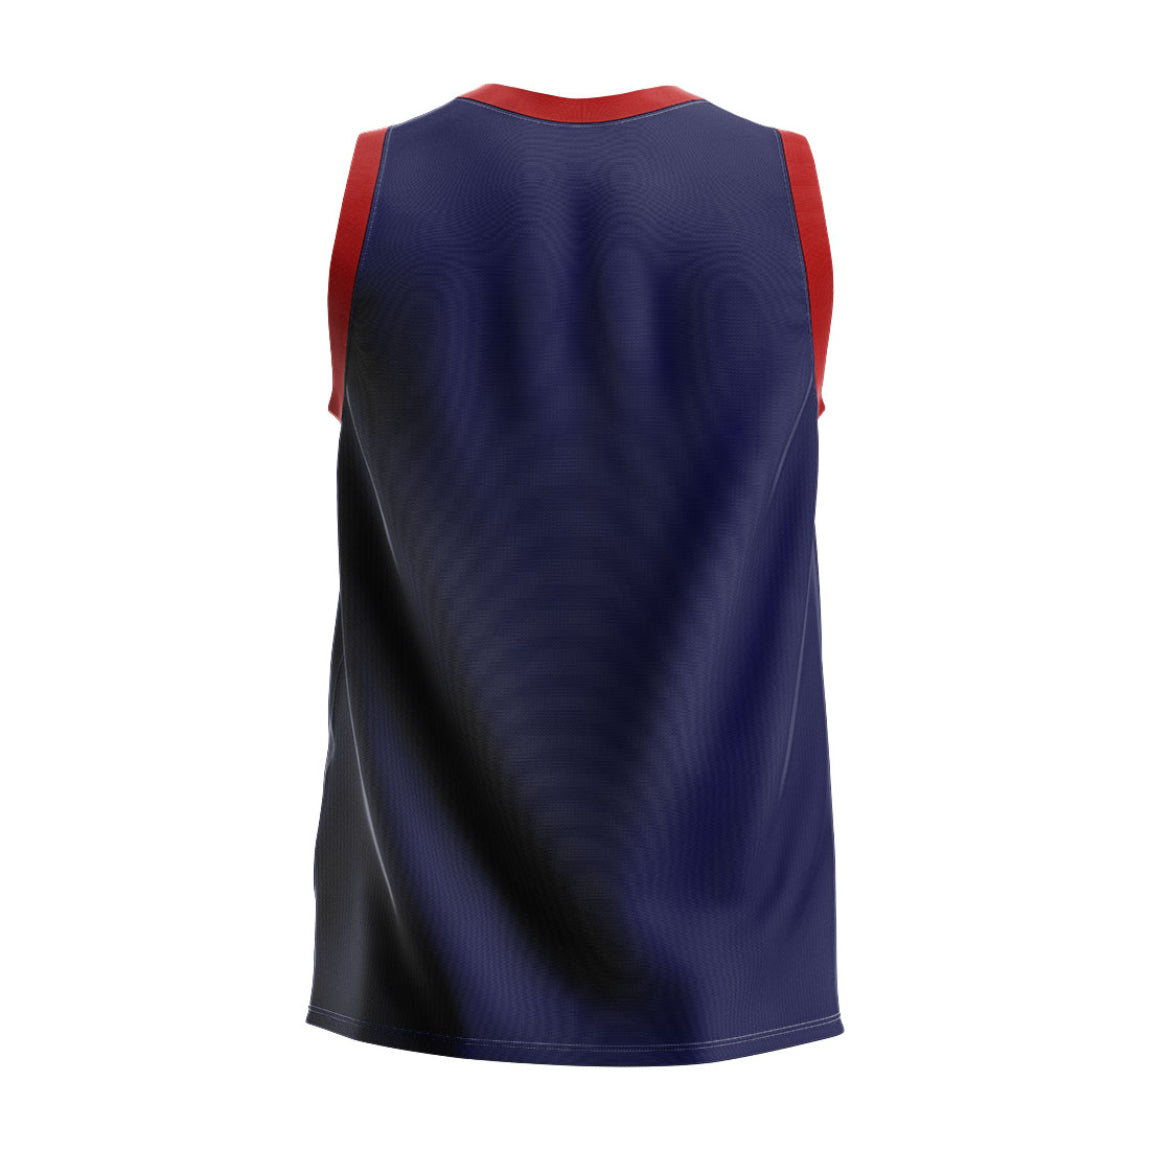 Sublimated Basketball Jersey